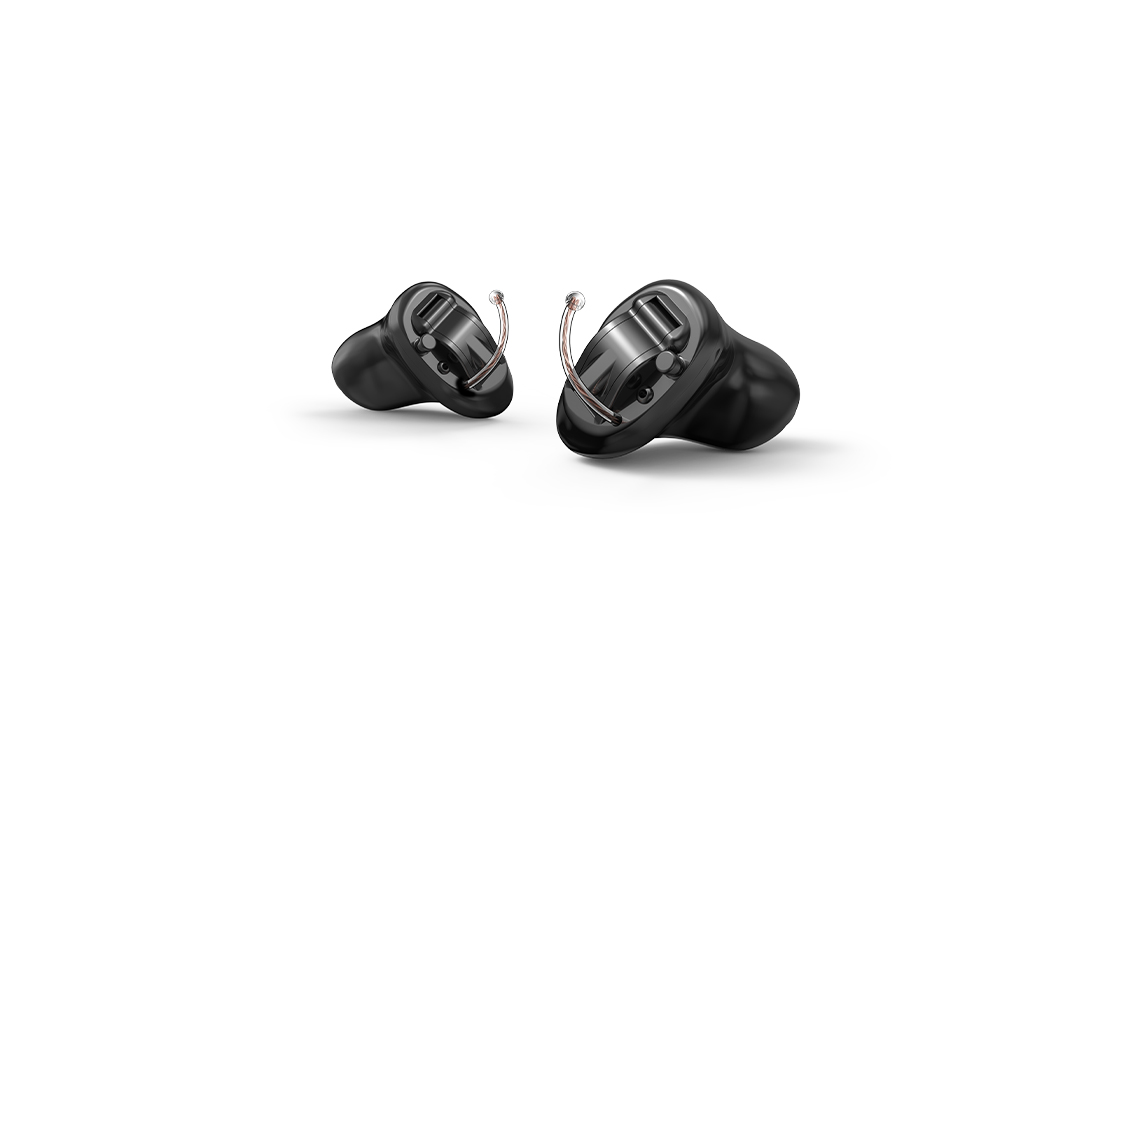 A pair of CIC hearing aids